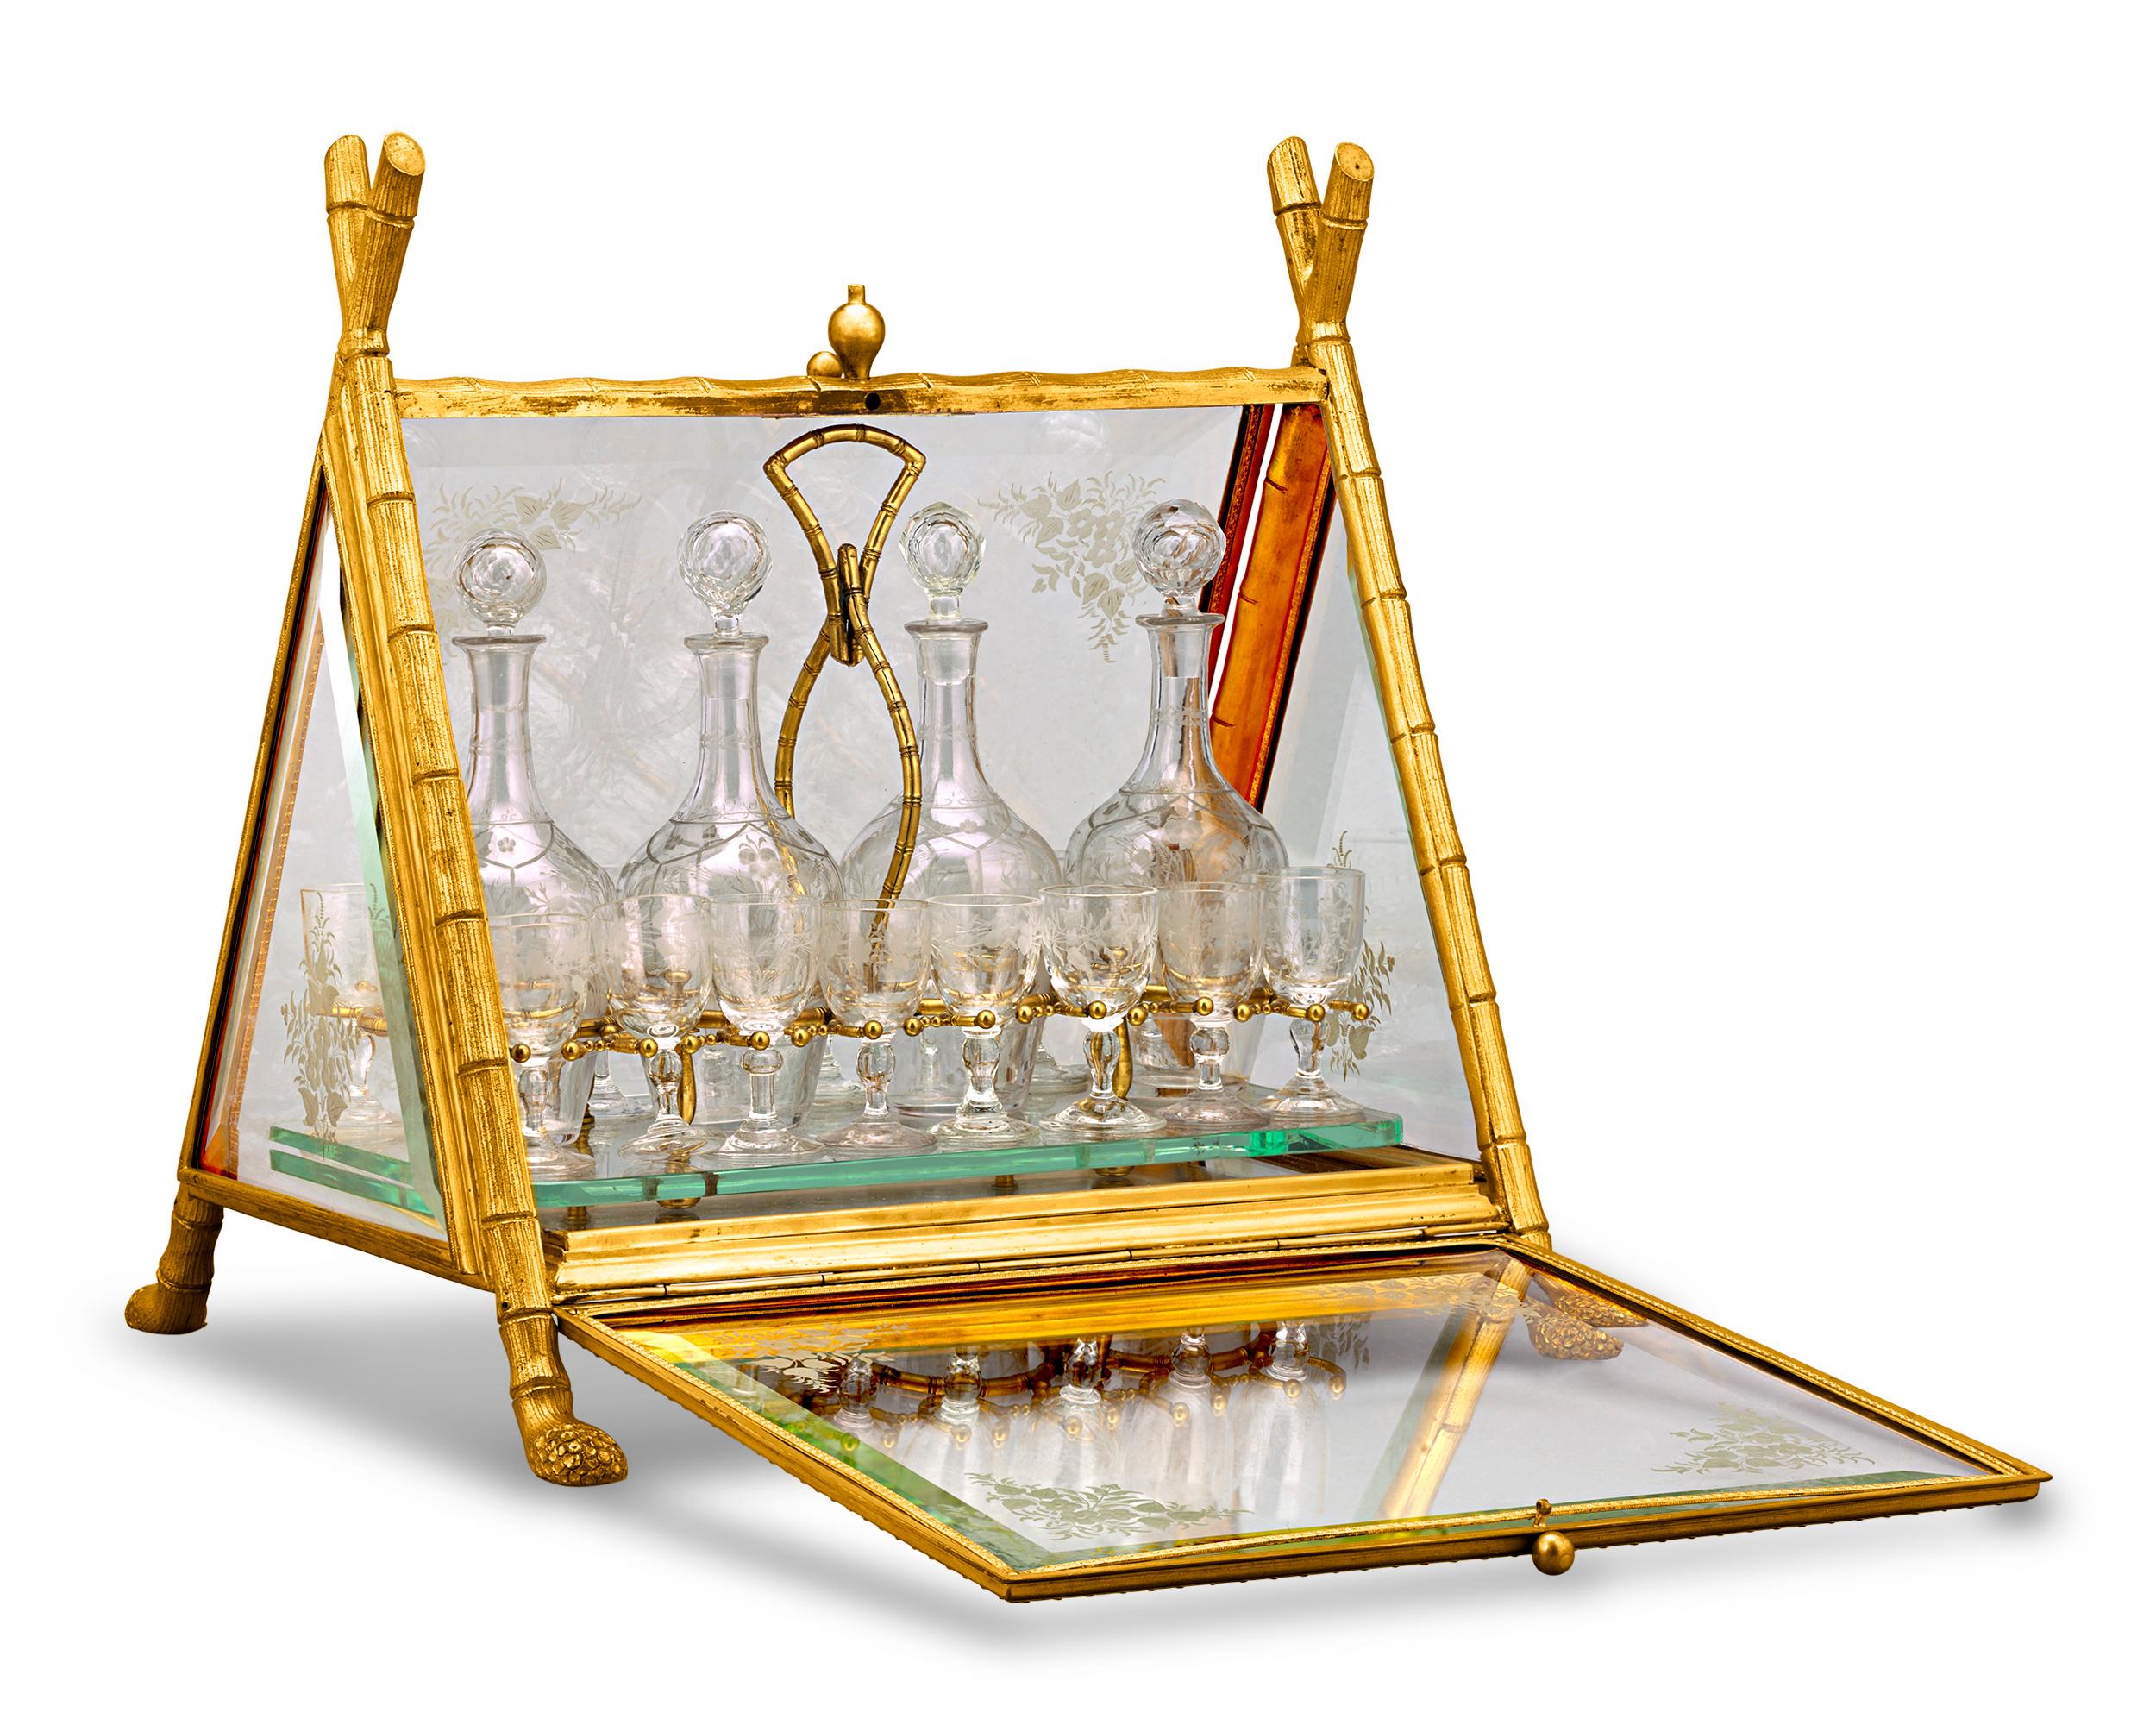 This charming and rare 19th-century cave à liqueur by the renowned cristallerie Baccarat gets a unique twist thanks to its oriental design. Taking the form of a palanquin, the doré bronze frame is fashioned in the style of bamboo shoots with root